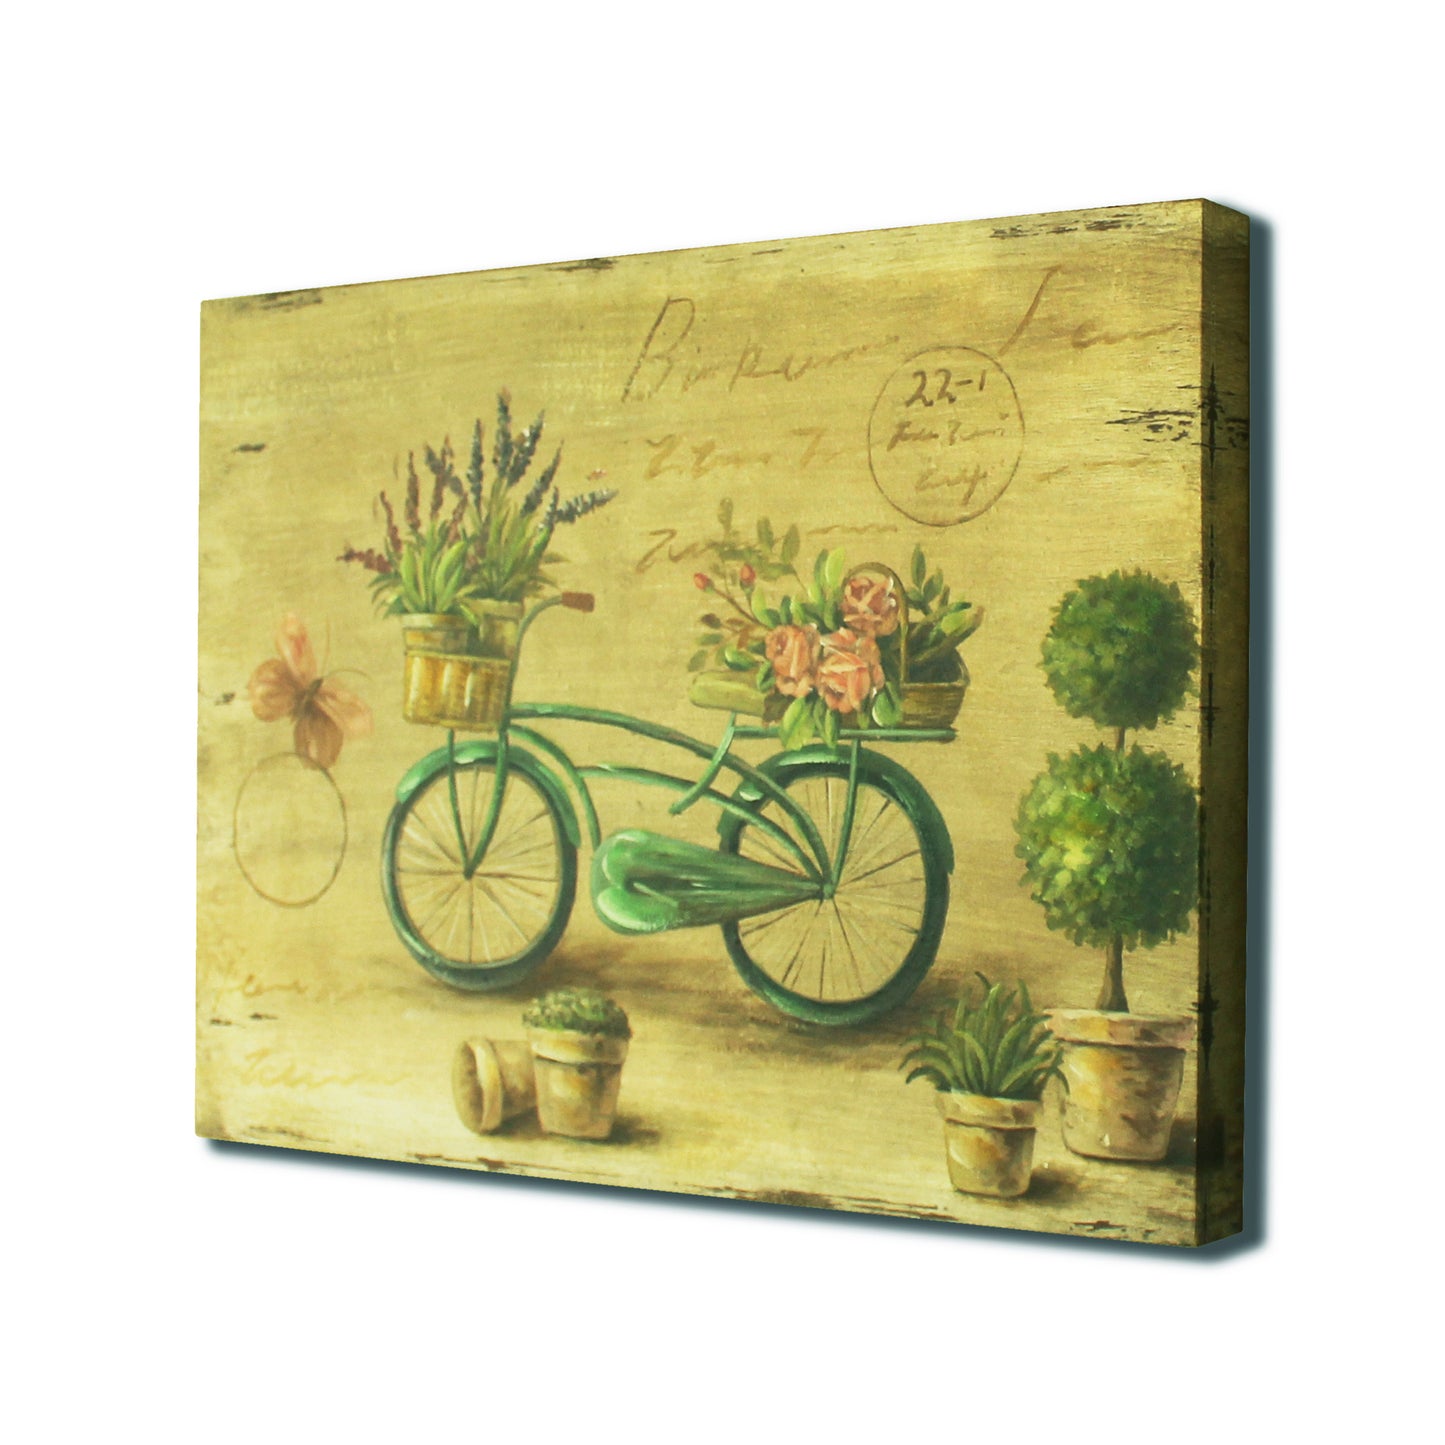 CVHOMEDECO. Primitive Vintage Hand Painted Wooden Frame Wall Hanging 3D Painting Decoration Art, Bicycle Flower Butterfly Design, 15.75 x 12 Inch